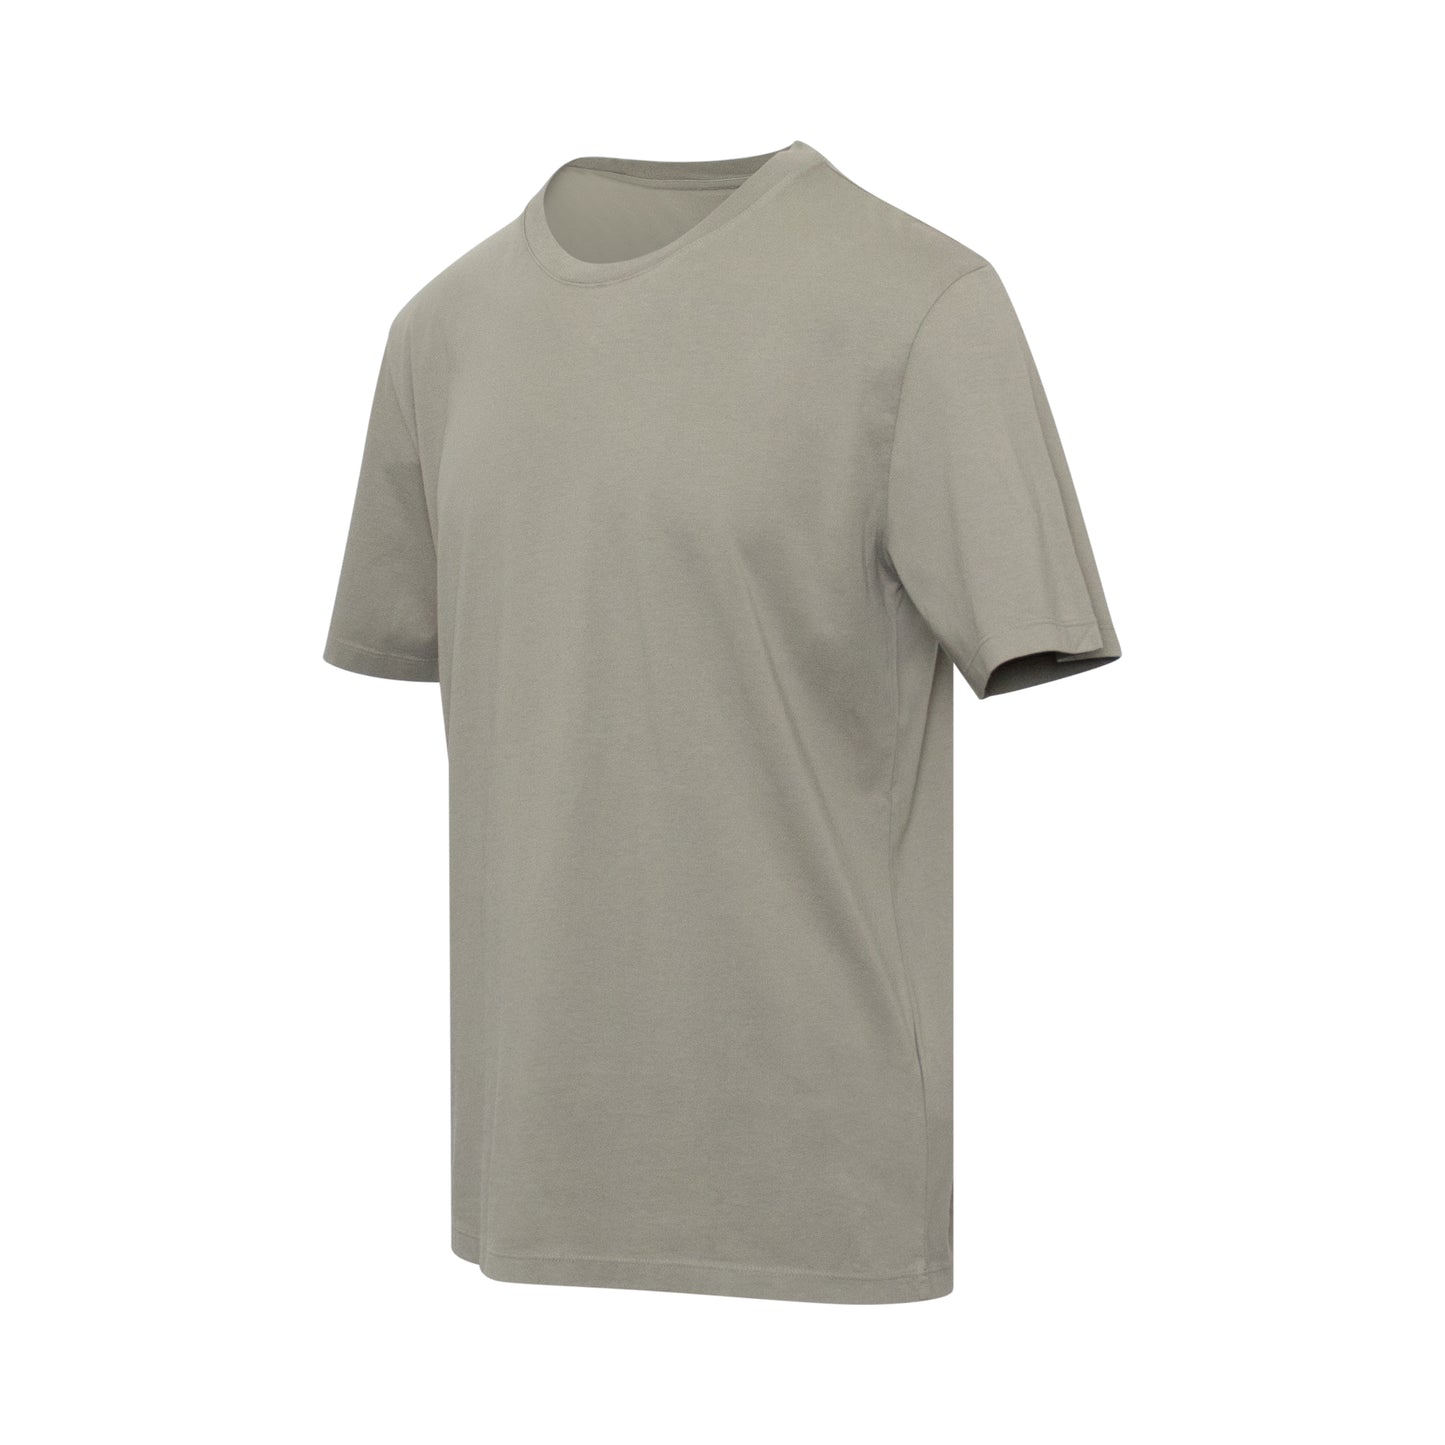 Classic Basic T-Shirt in Sage